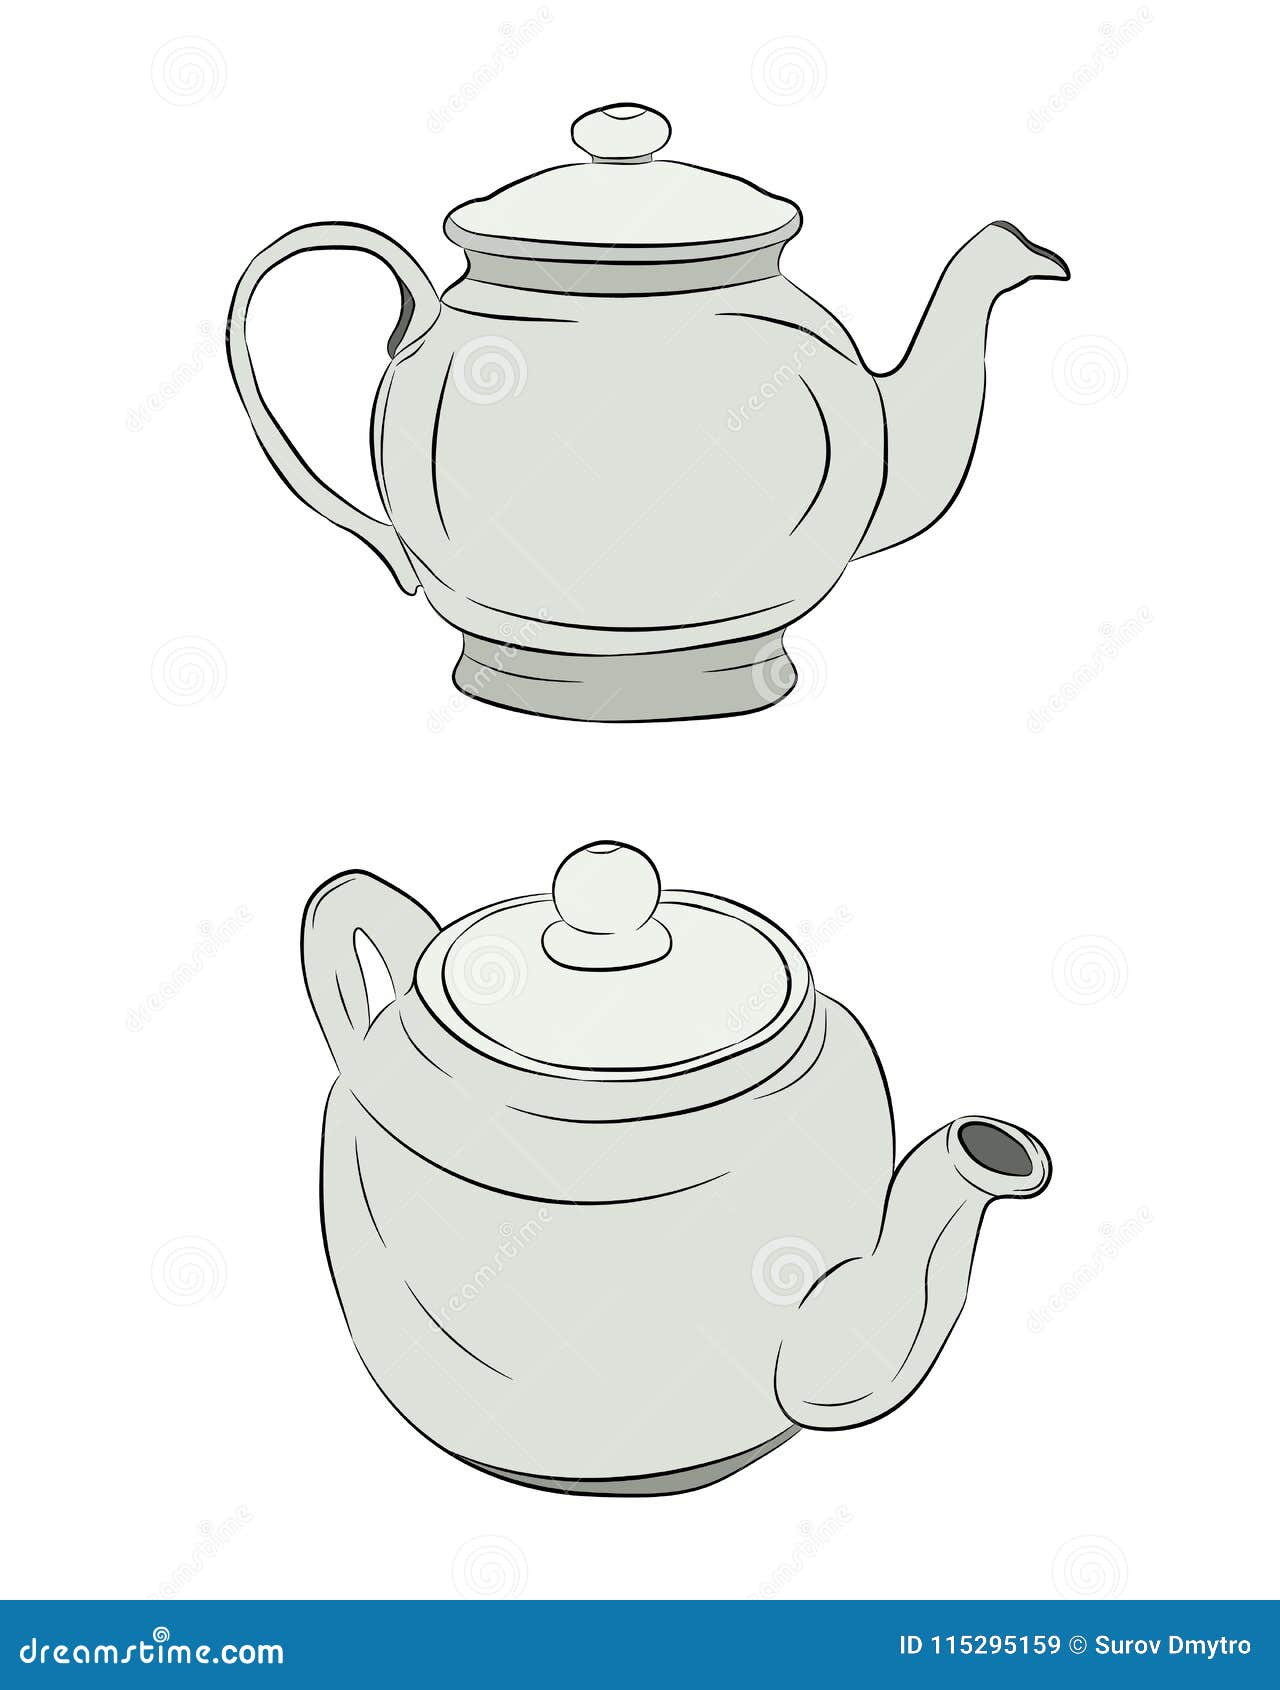 How to Draw a Tea Pot - Really Easy Drawing Tutorial